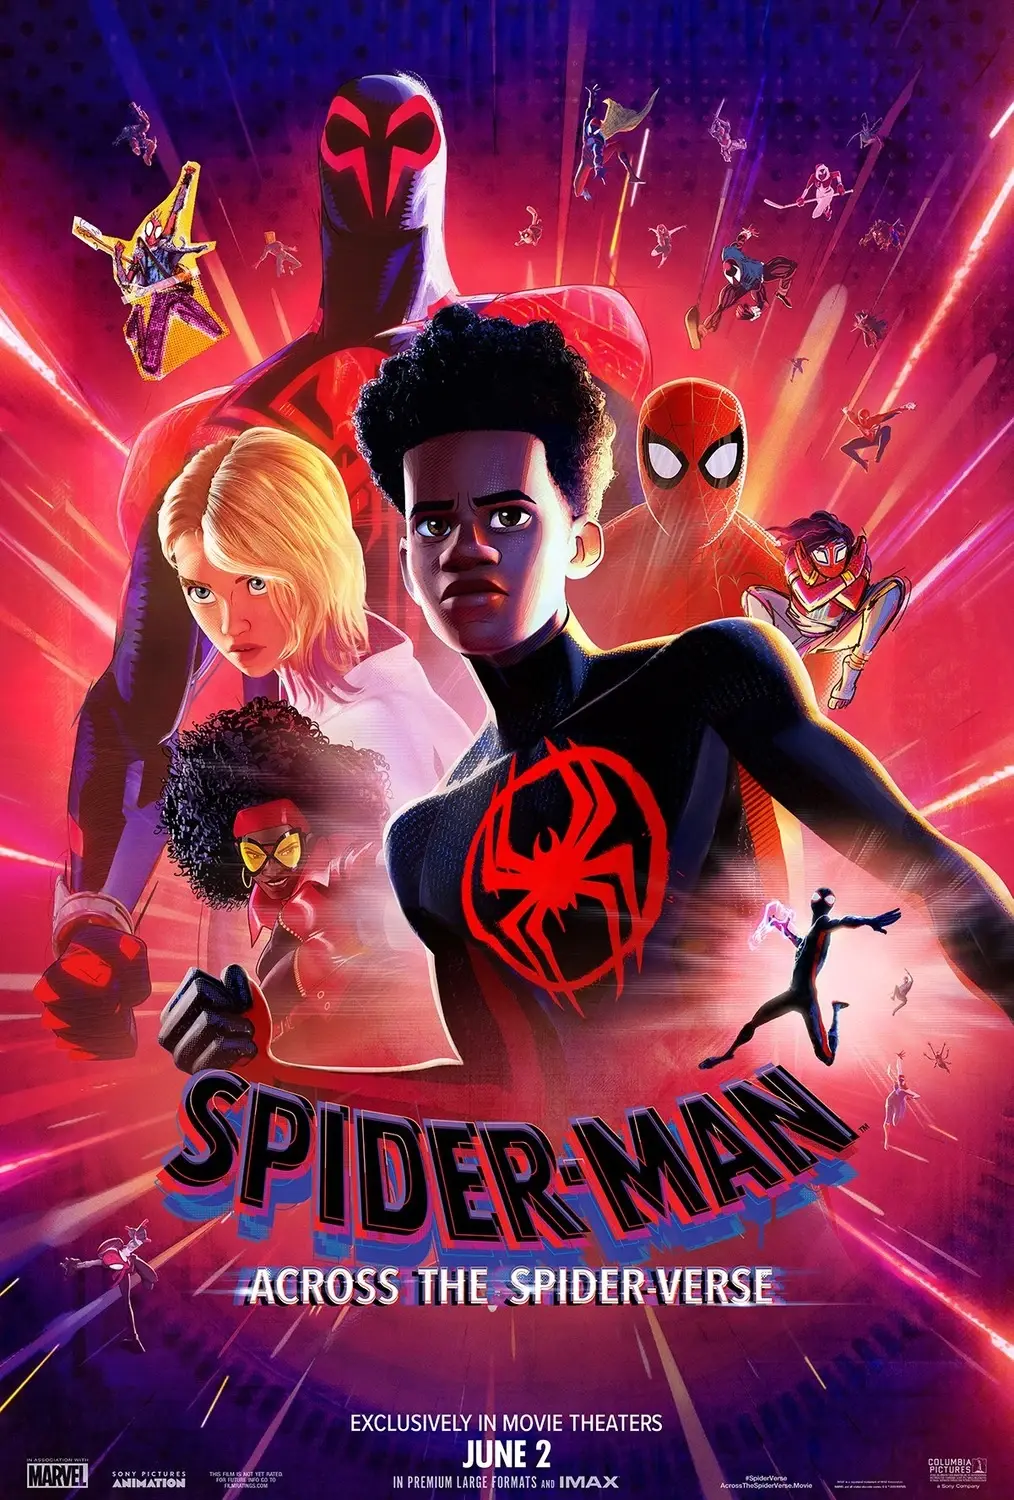 Spider-Man: Across the Spider-Verse sets an unreachable bar for sequels